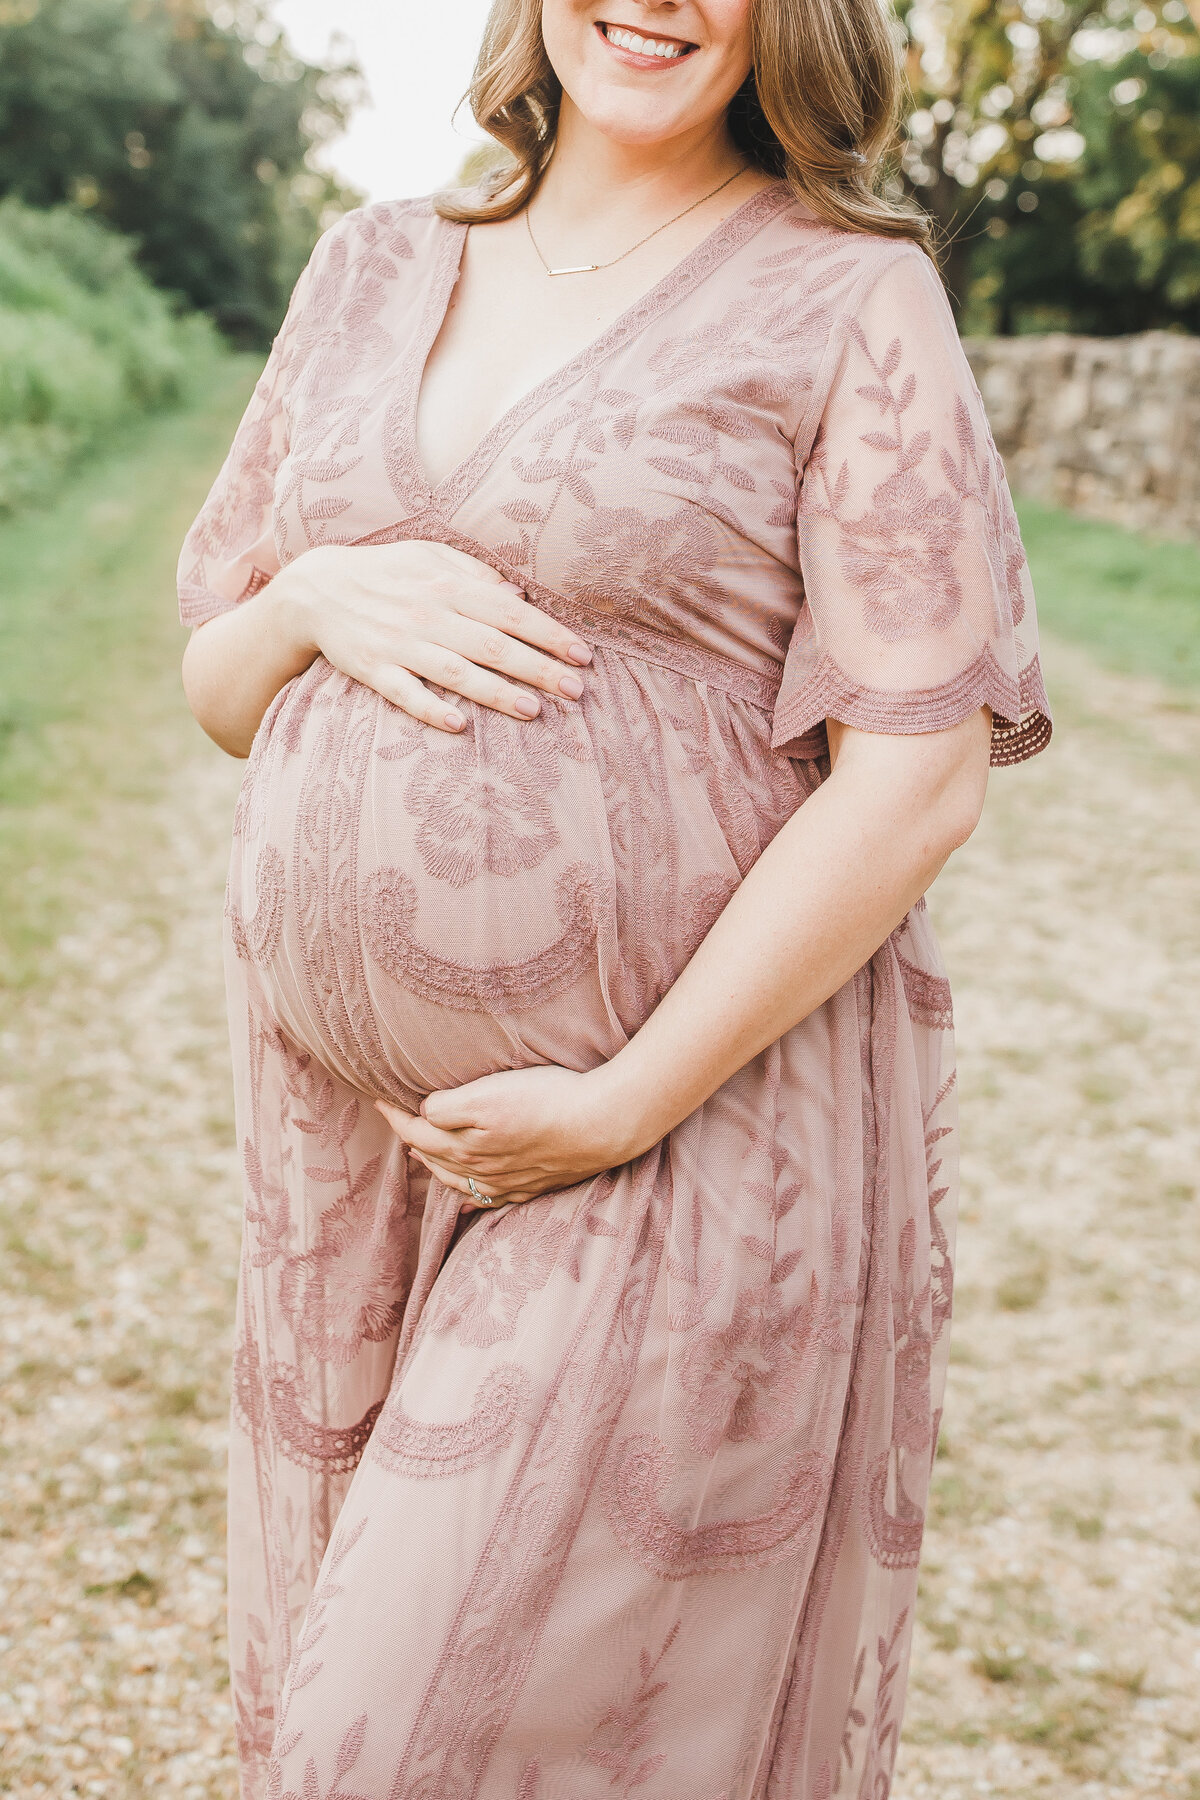 Lawson - Virginia Maternity Photographer - Photography by Amy Nicole-352-19